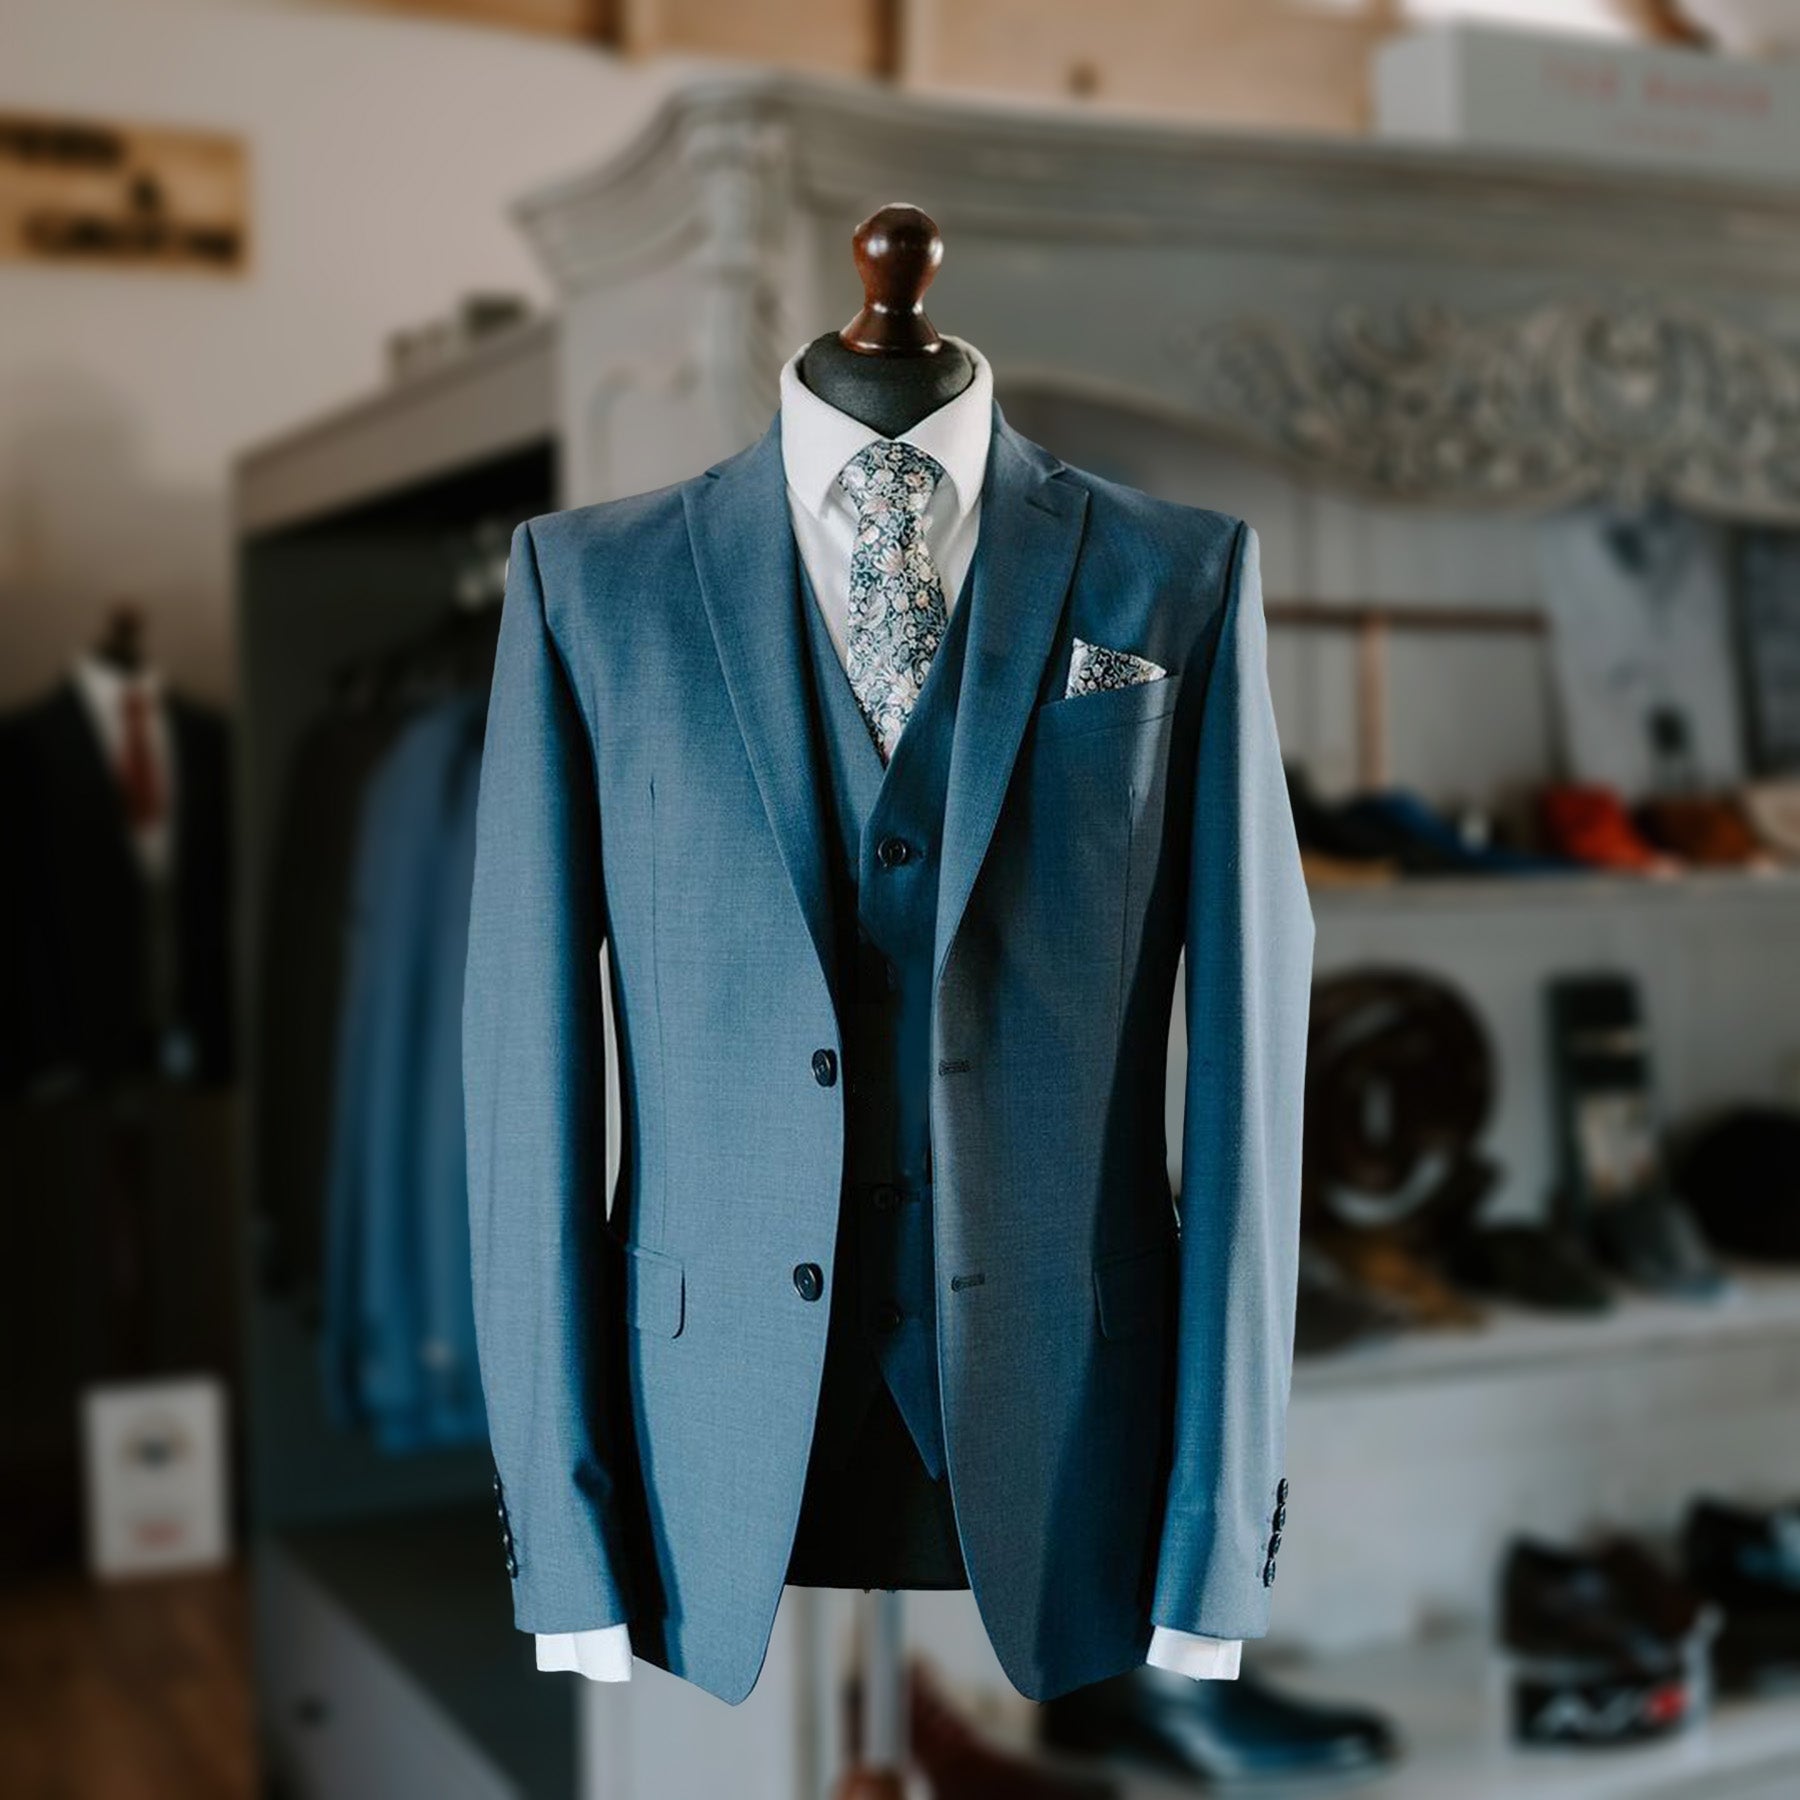 How to Choose Wedding Waistcoats and Ties for Grooms